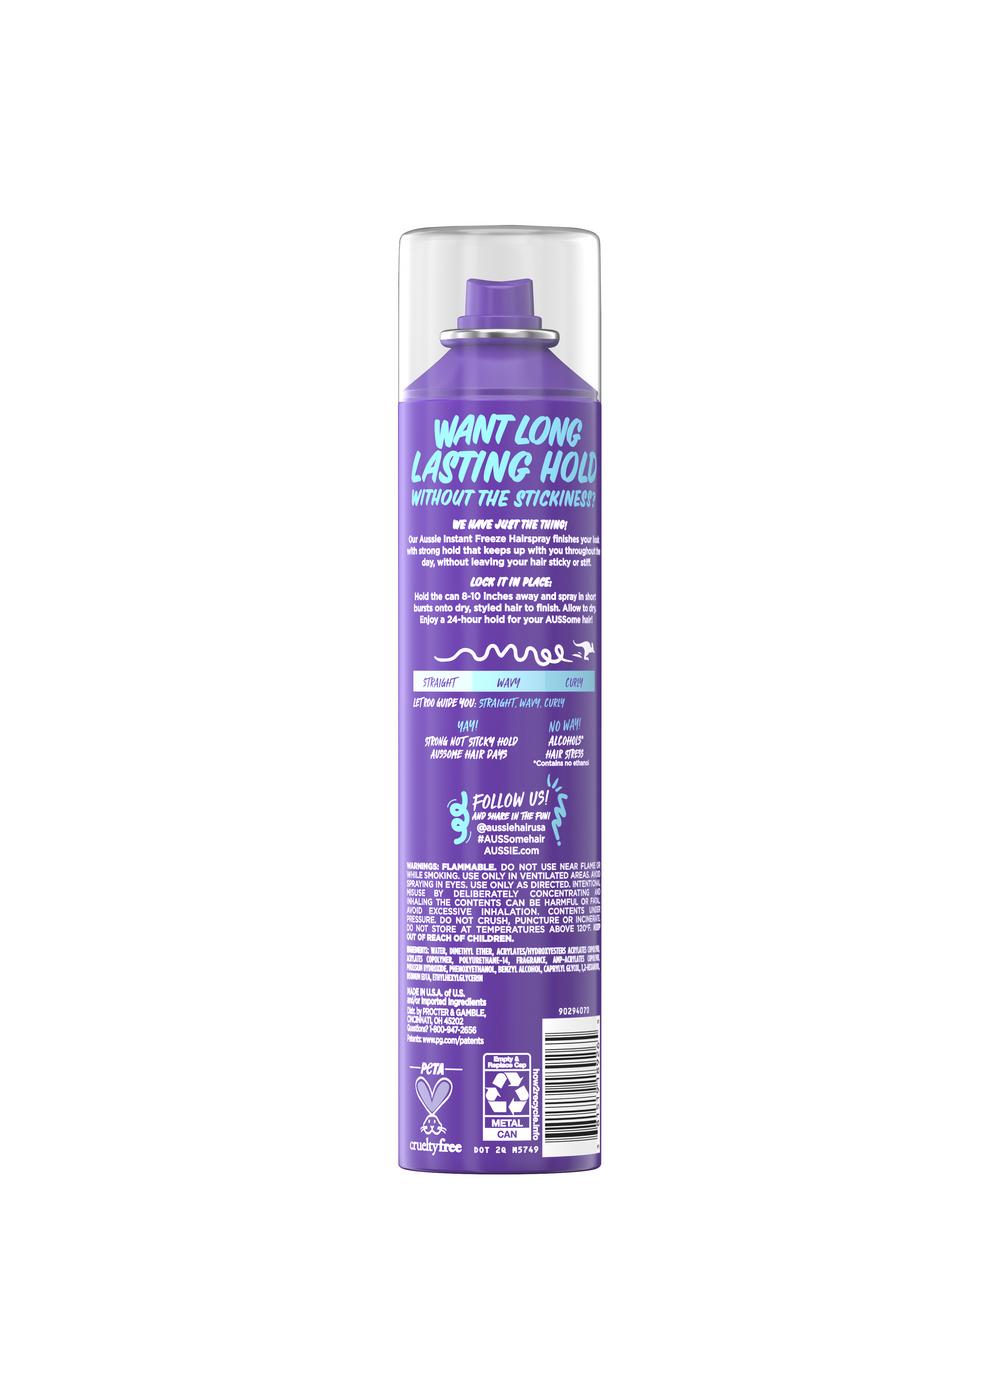 Aussie Instant Freeze Hairspray  Hy-Vee Aisles Online Grocery Shopping